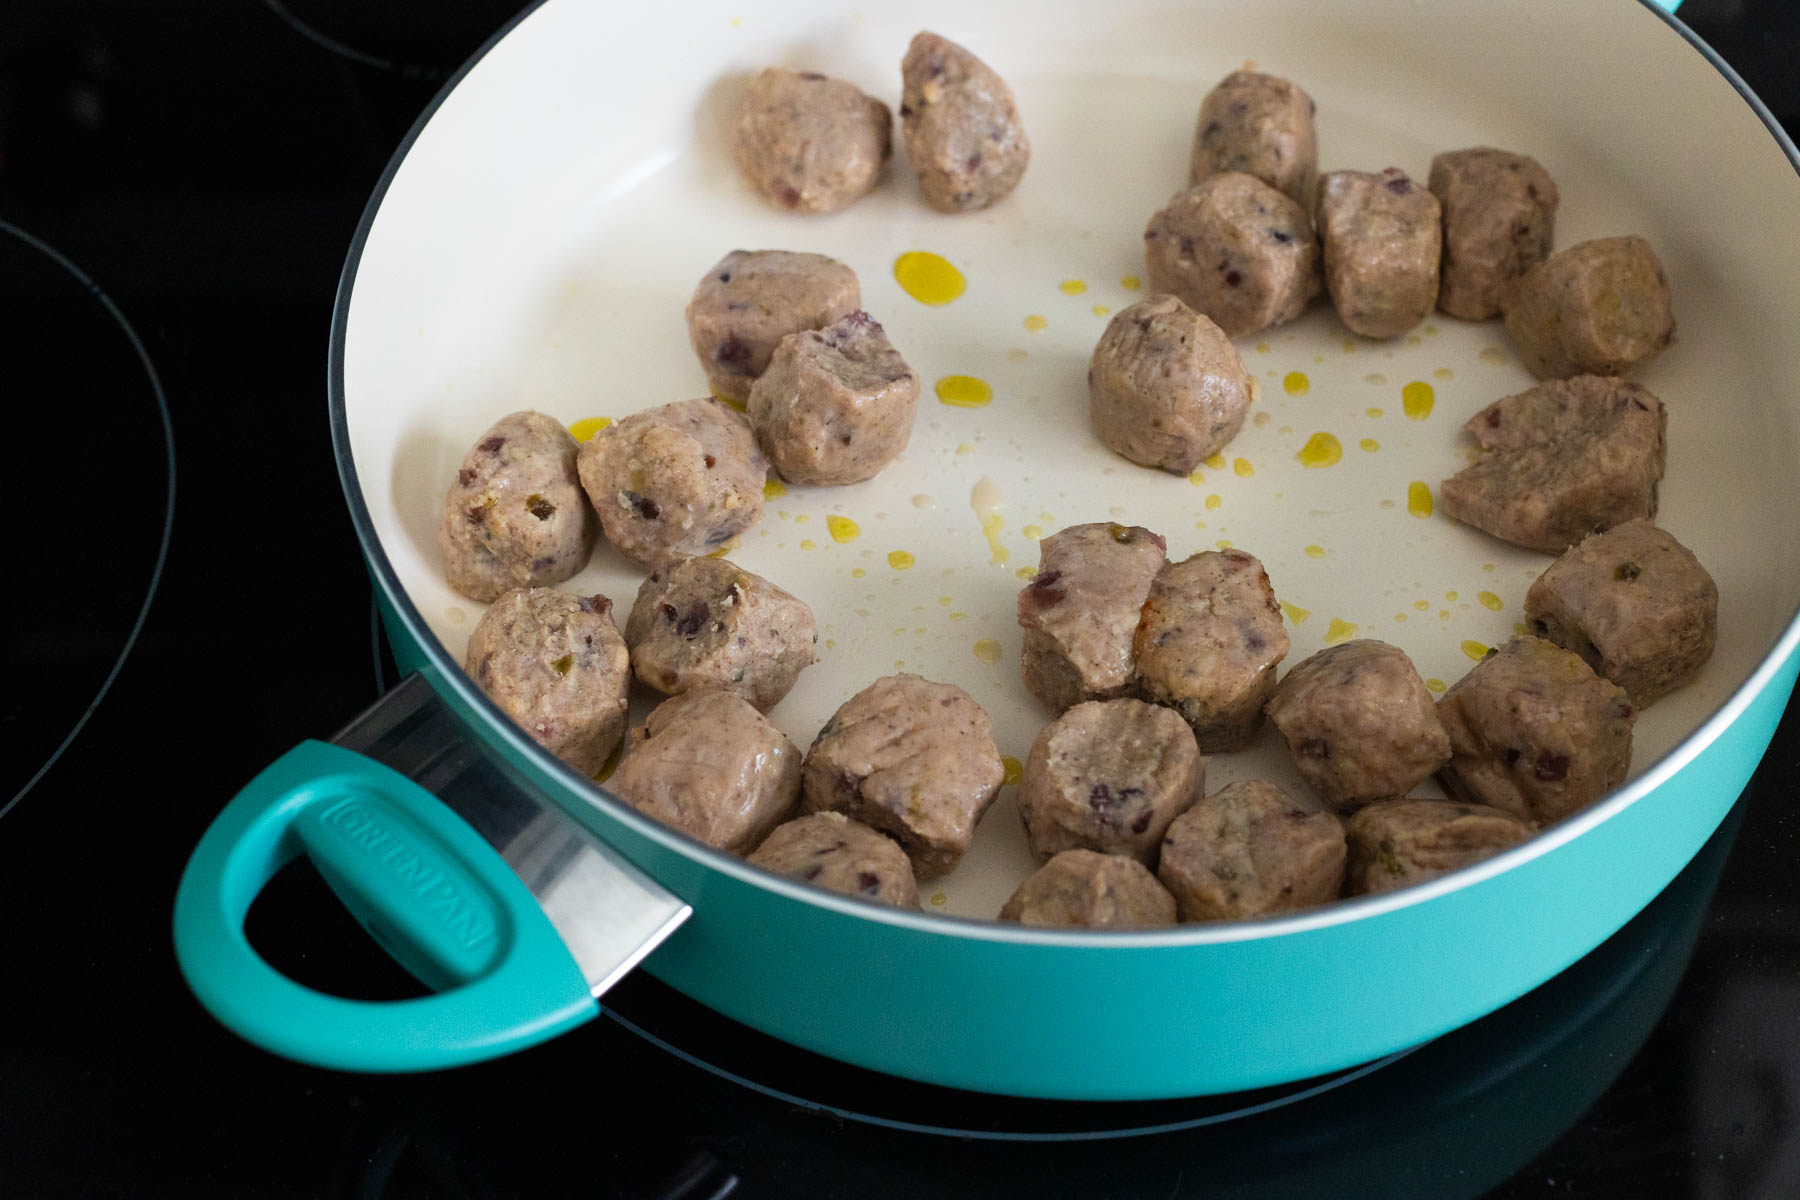 The prepared meatballs are browning in a large skillet with a little olive oil.